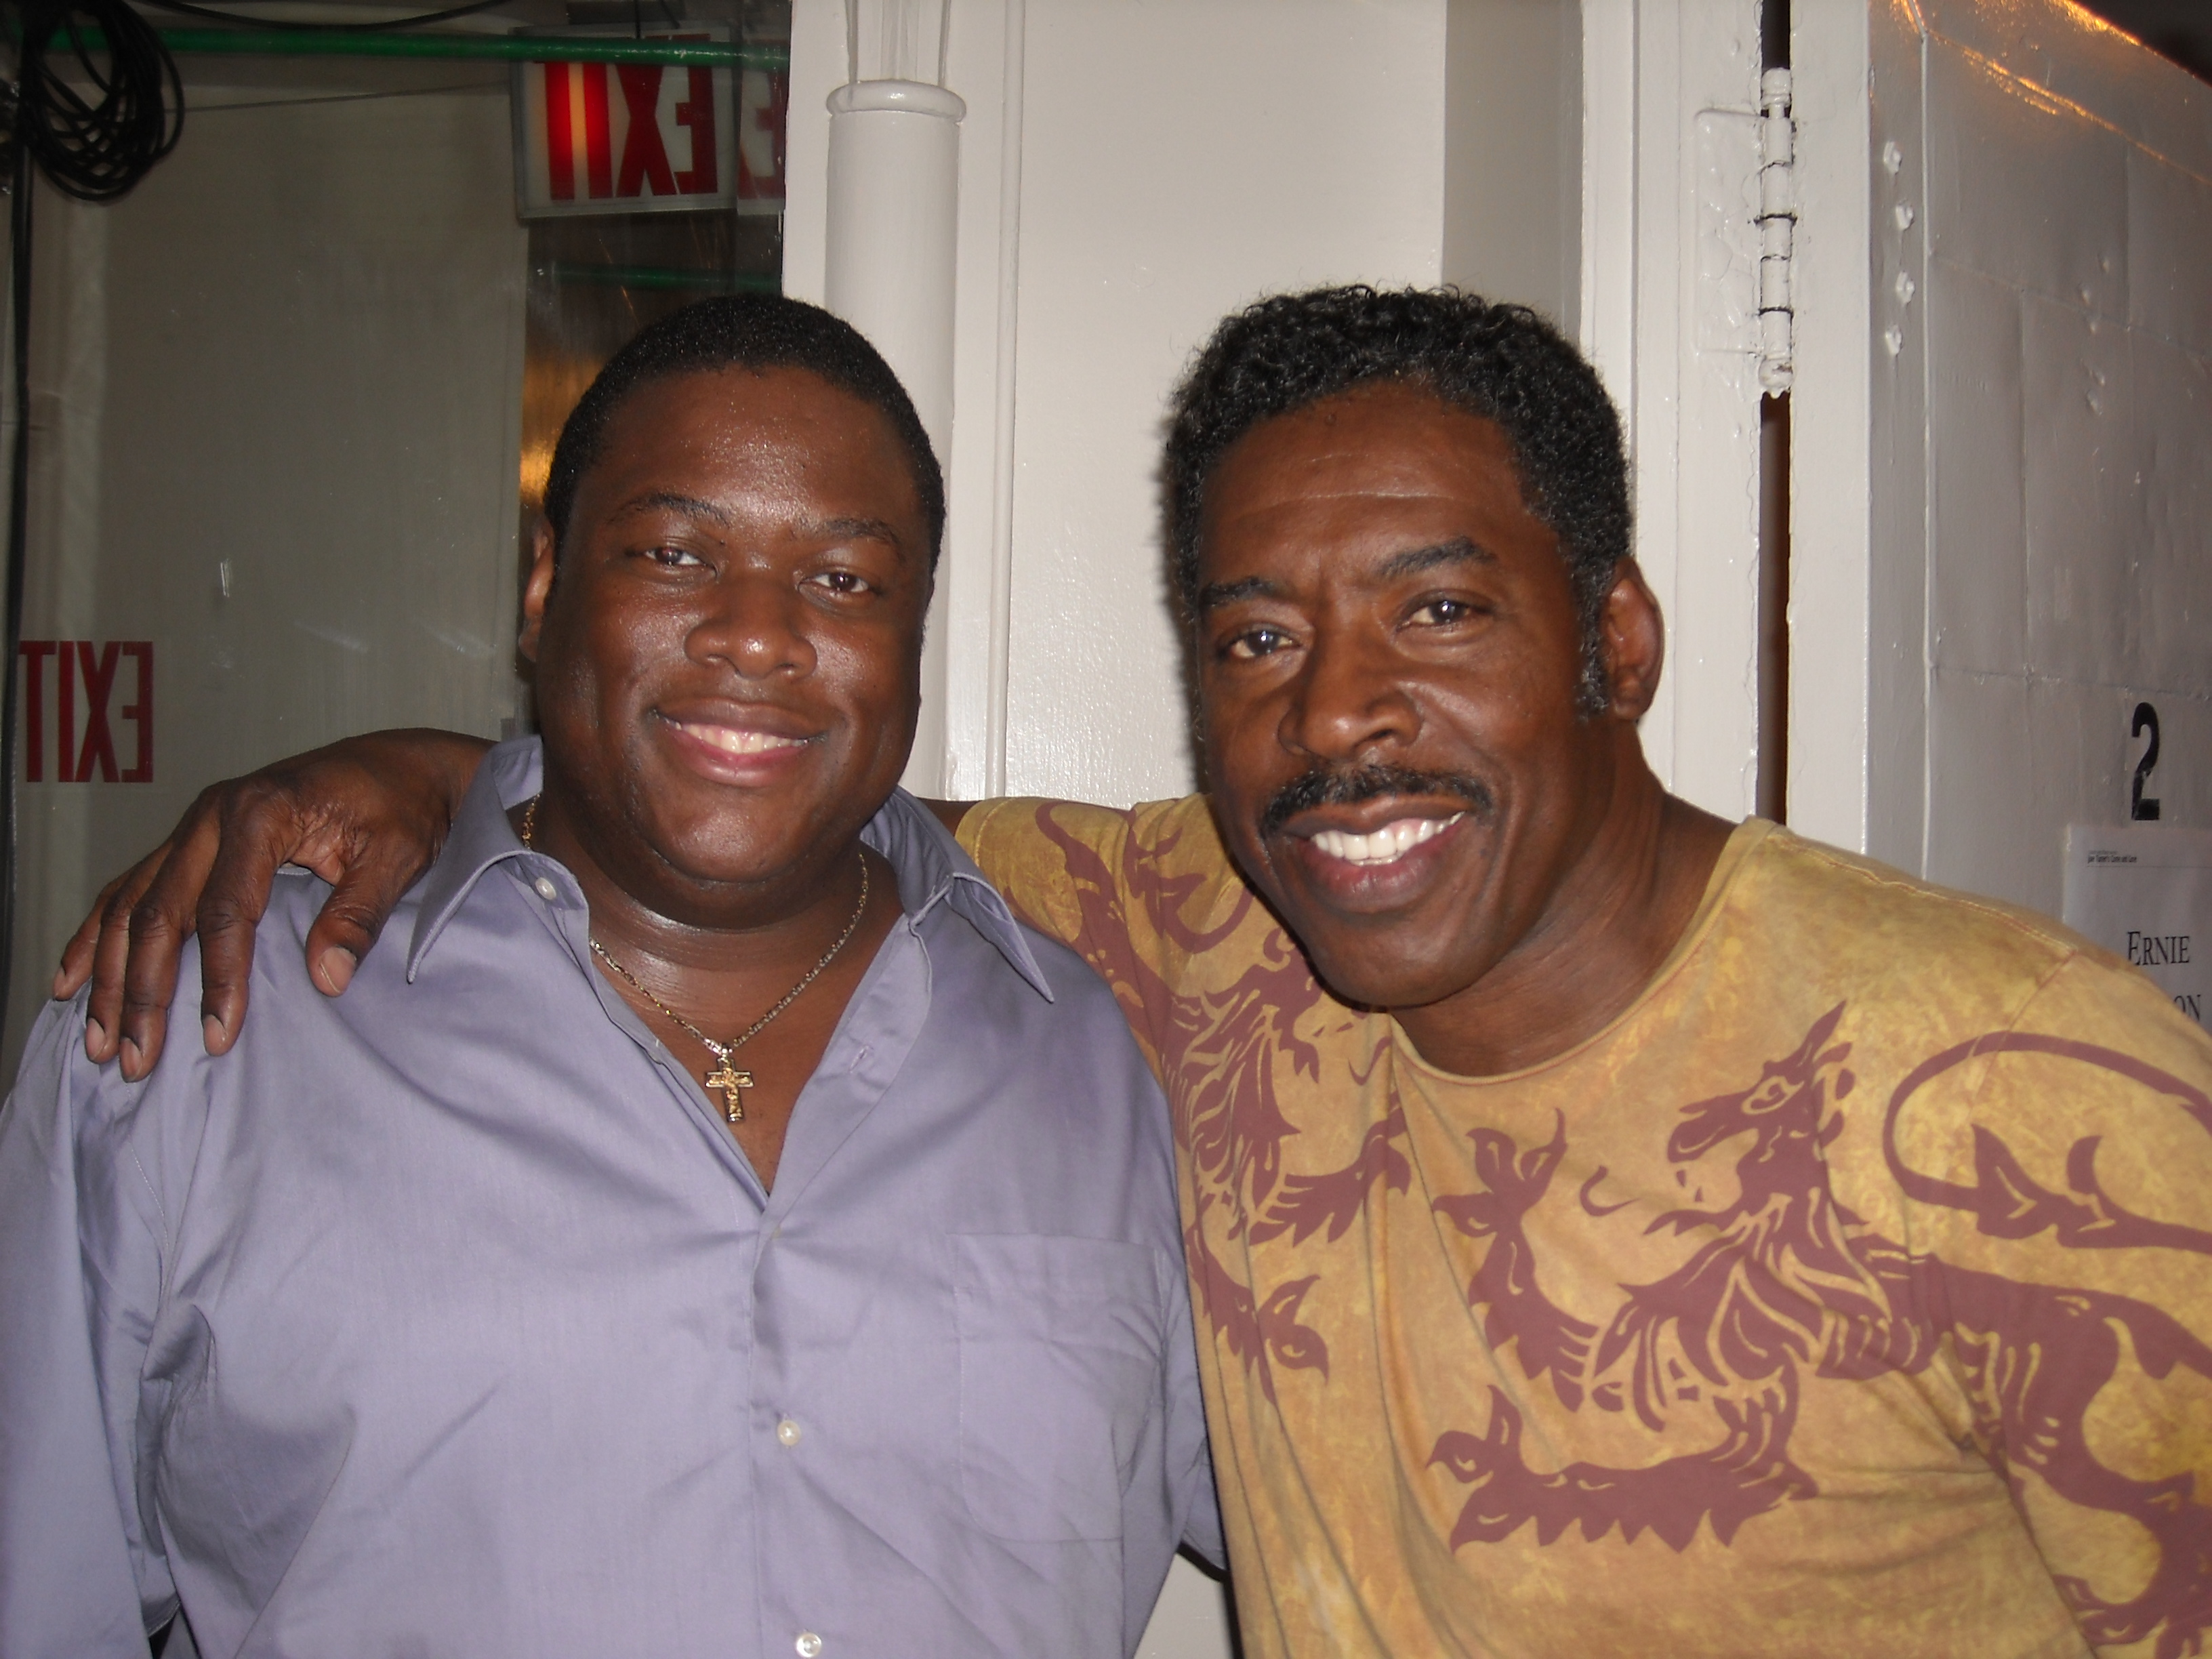 Michael J. Arbouet and Ernie Hudson backstage at August Wilson's play Joe Turner's Come and Gone.